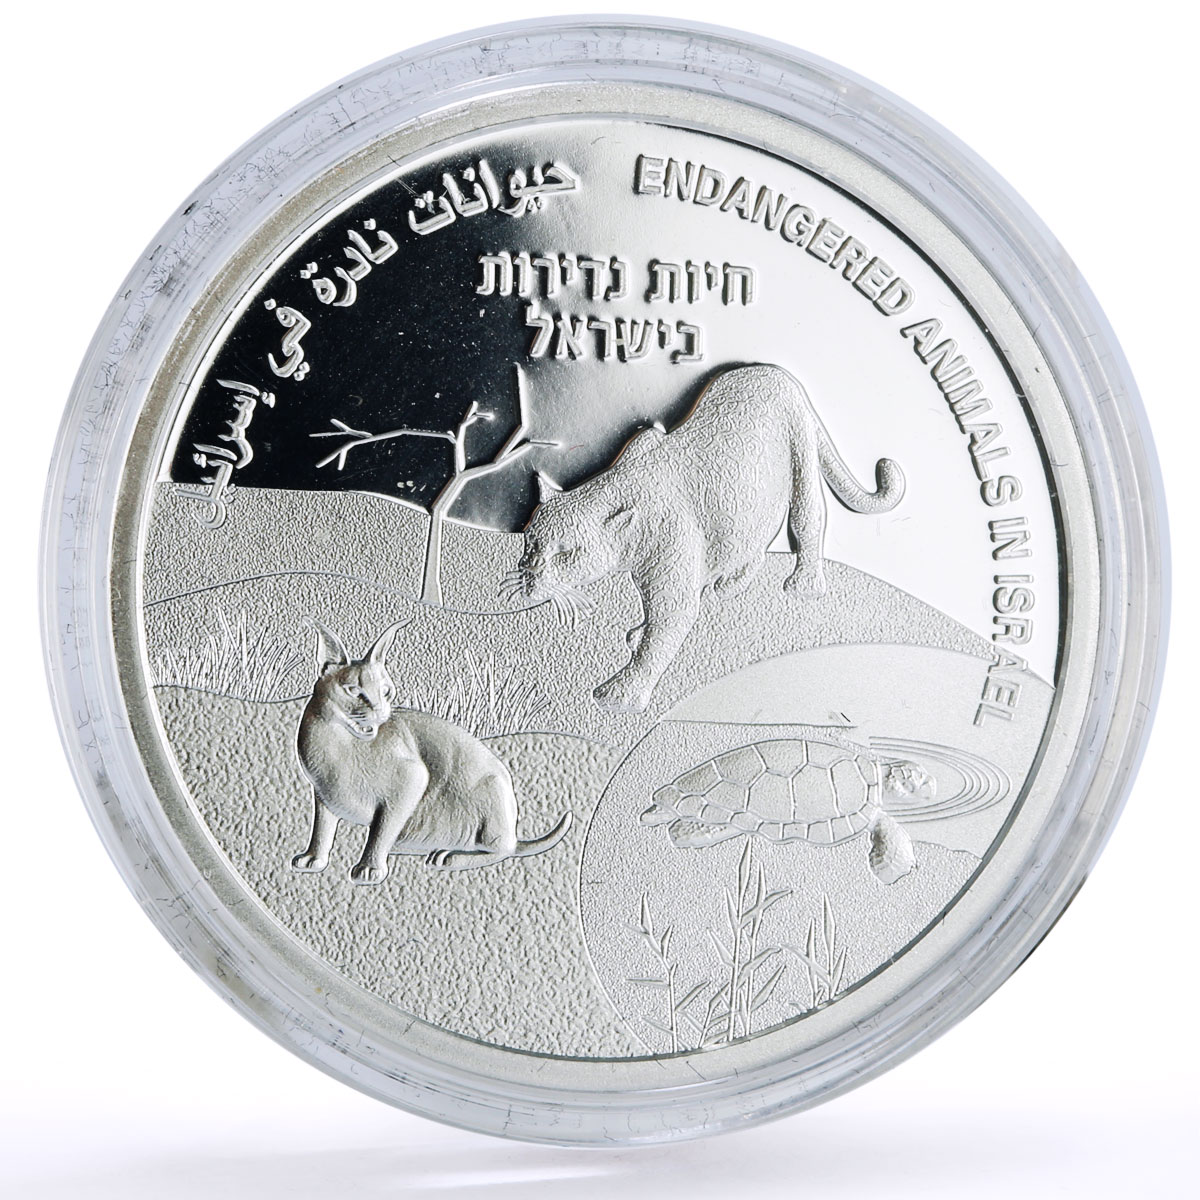 Israel 1 sheqalim Independence Day Endangered Animals Fauna silver coin 2021